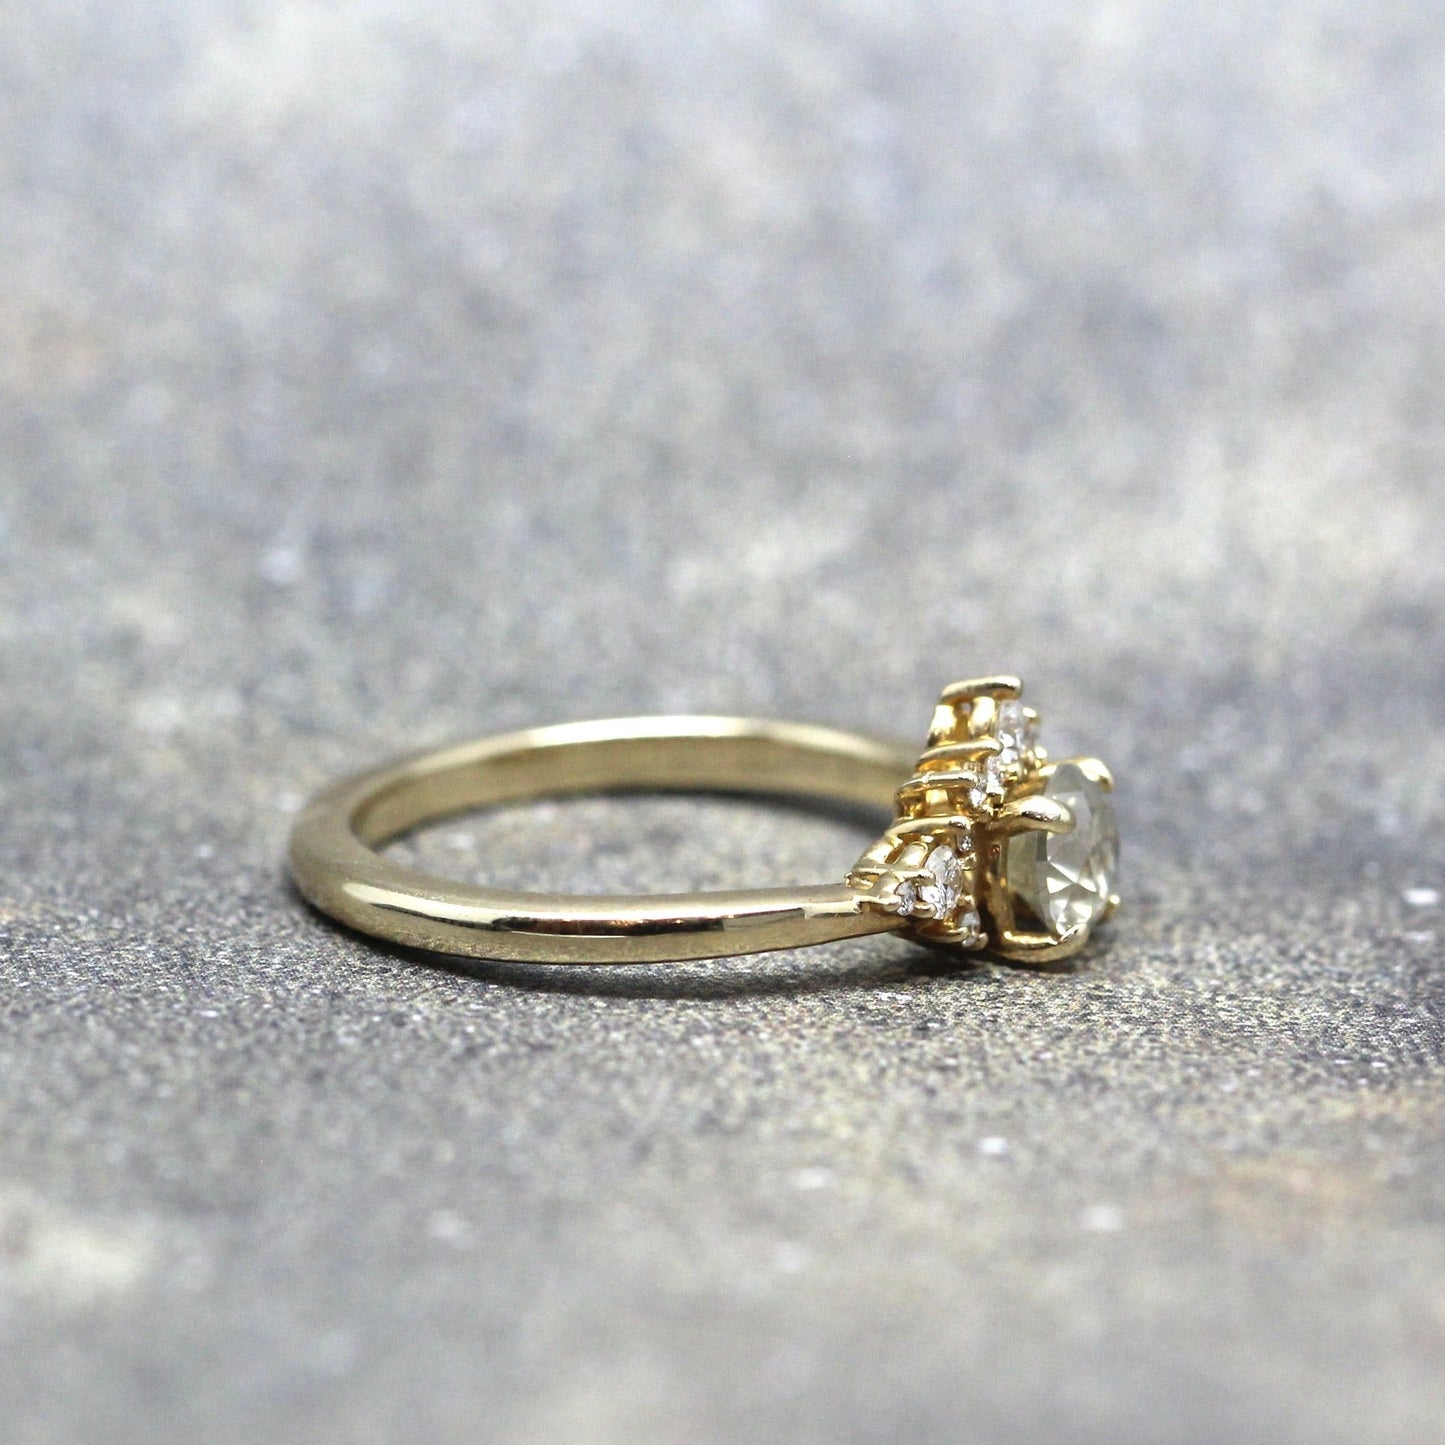 Yellow Gold Modern Halo Ring with Sparkling Icy Champagne Natural Diamond